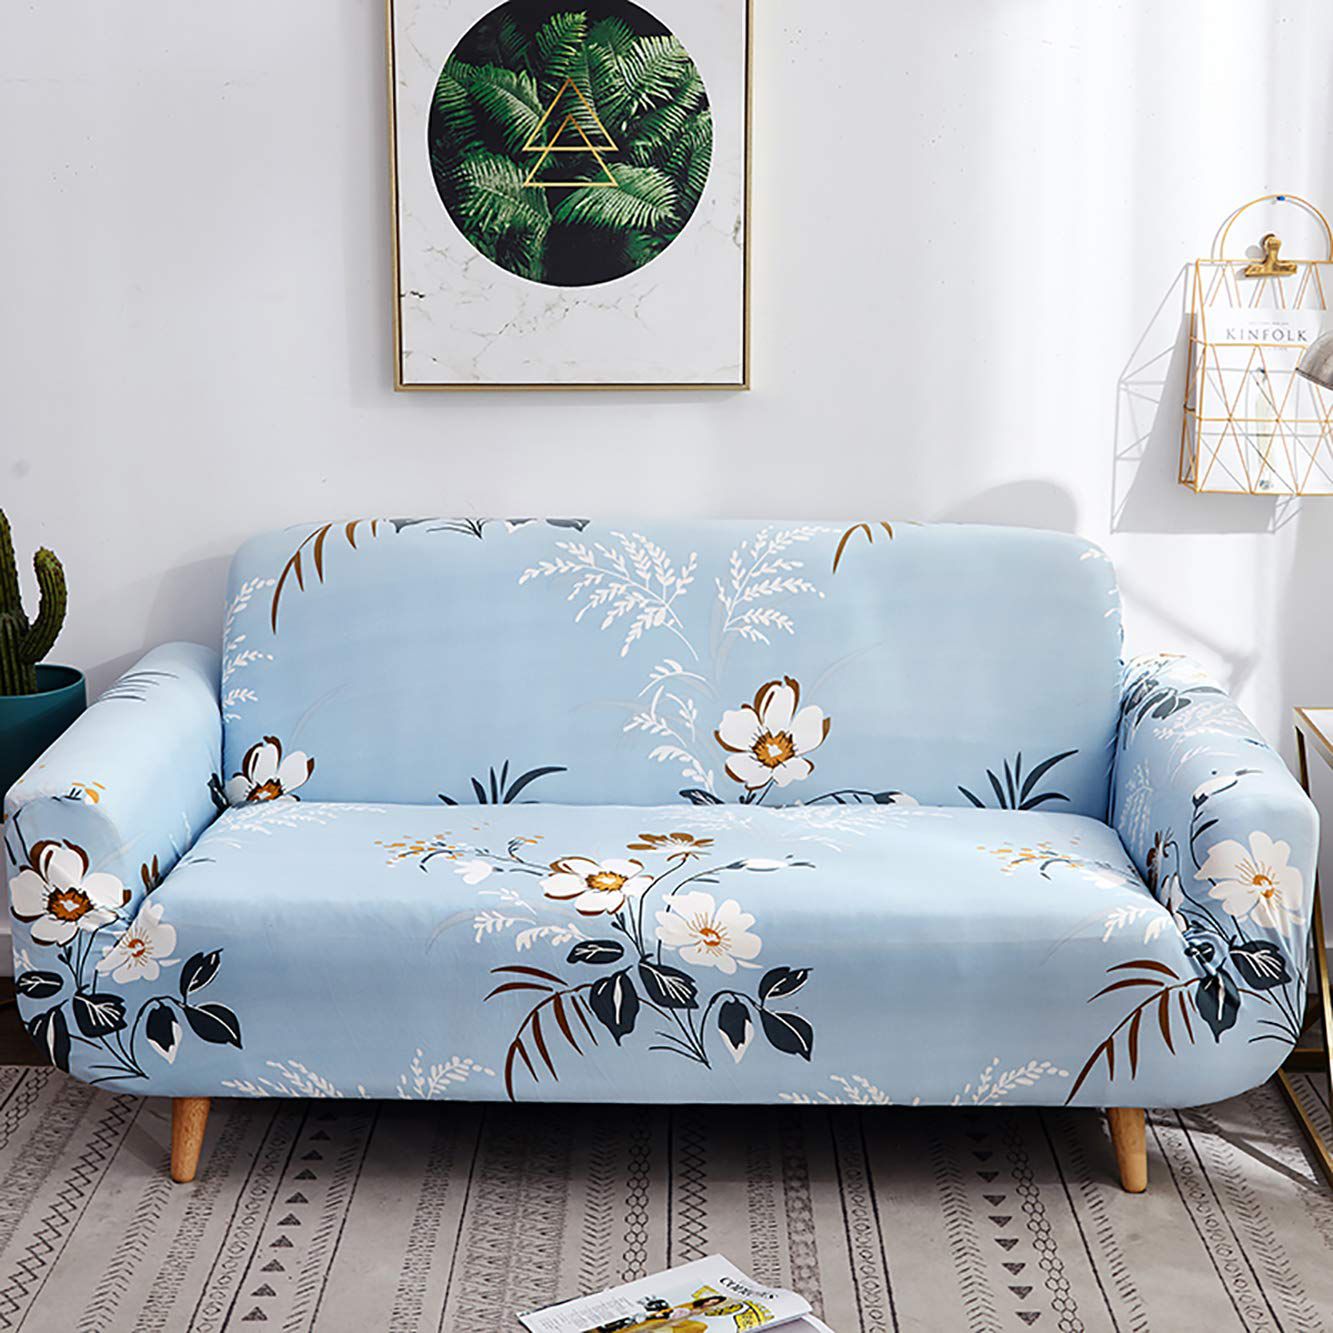     			House Of Quirk 1 Seater Poly Cotton Single Sofa Cover Set